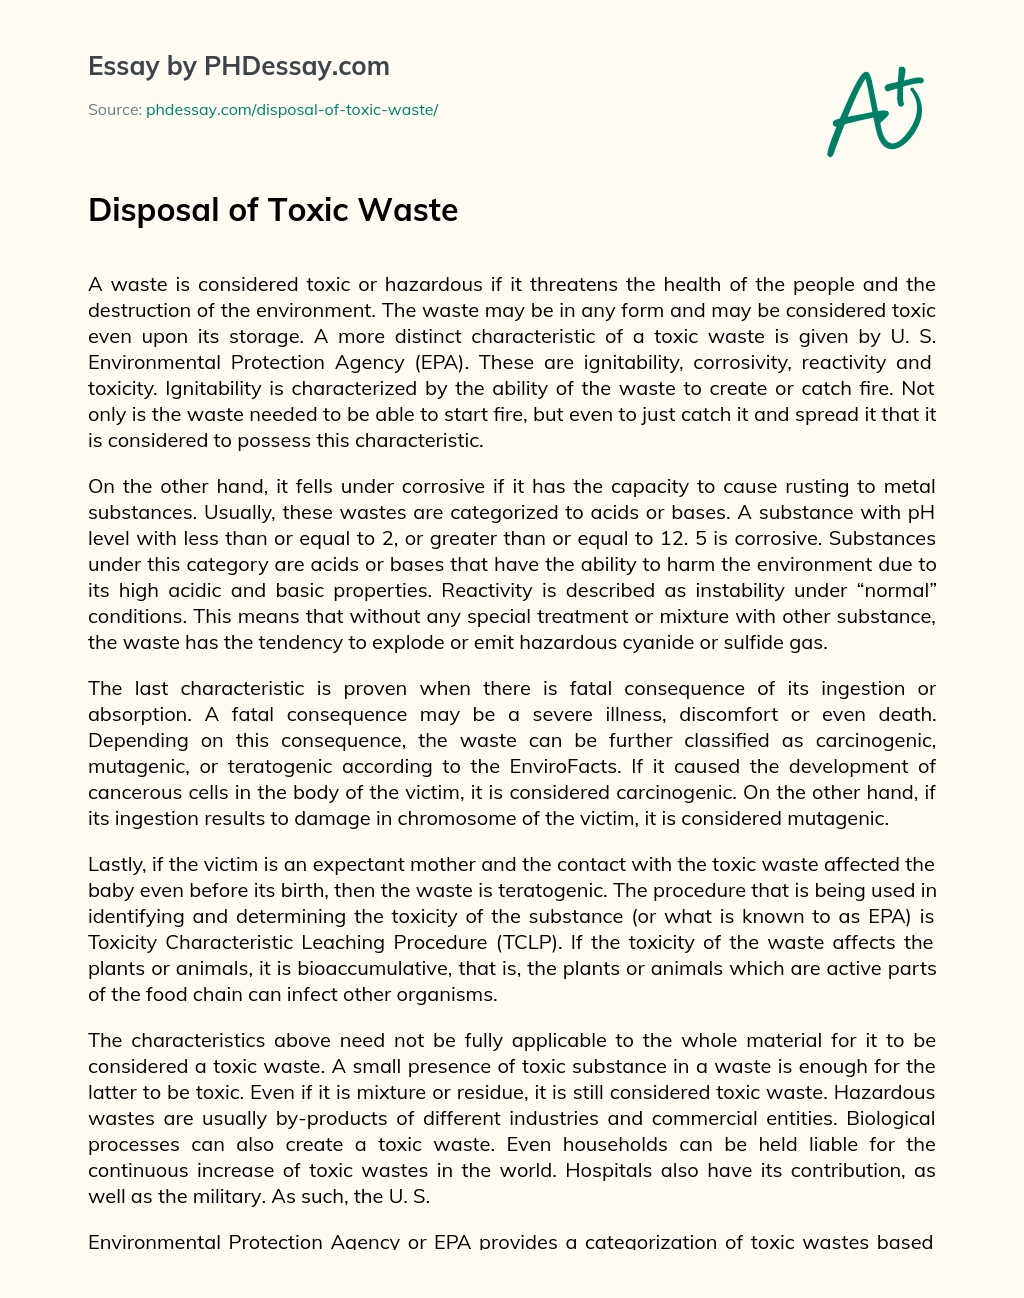 Disposal of Toxic Waste essay